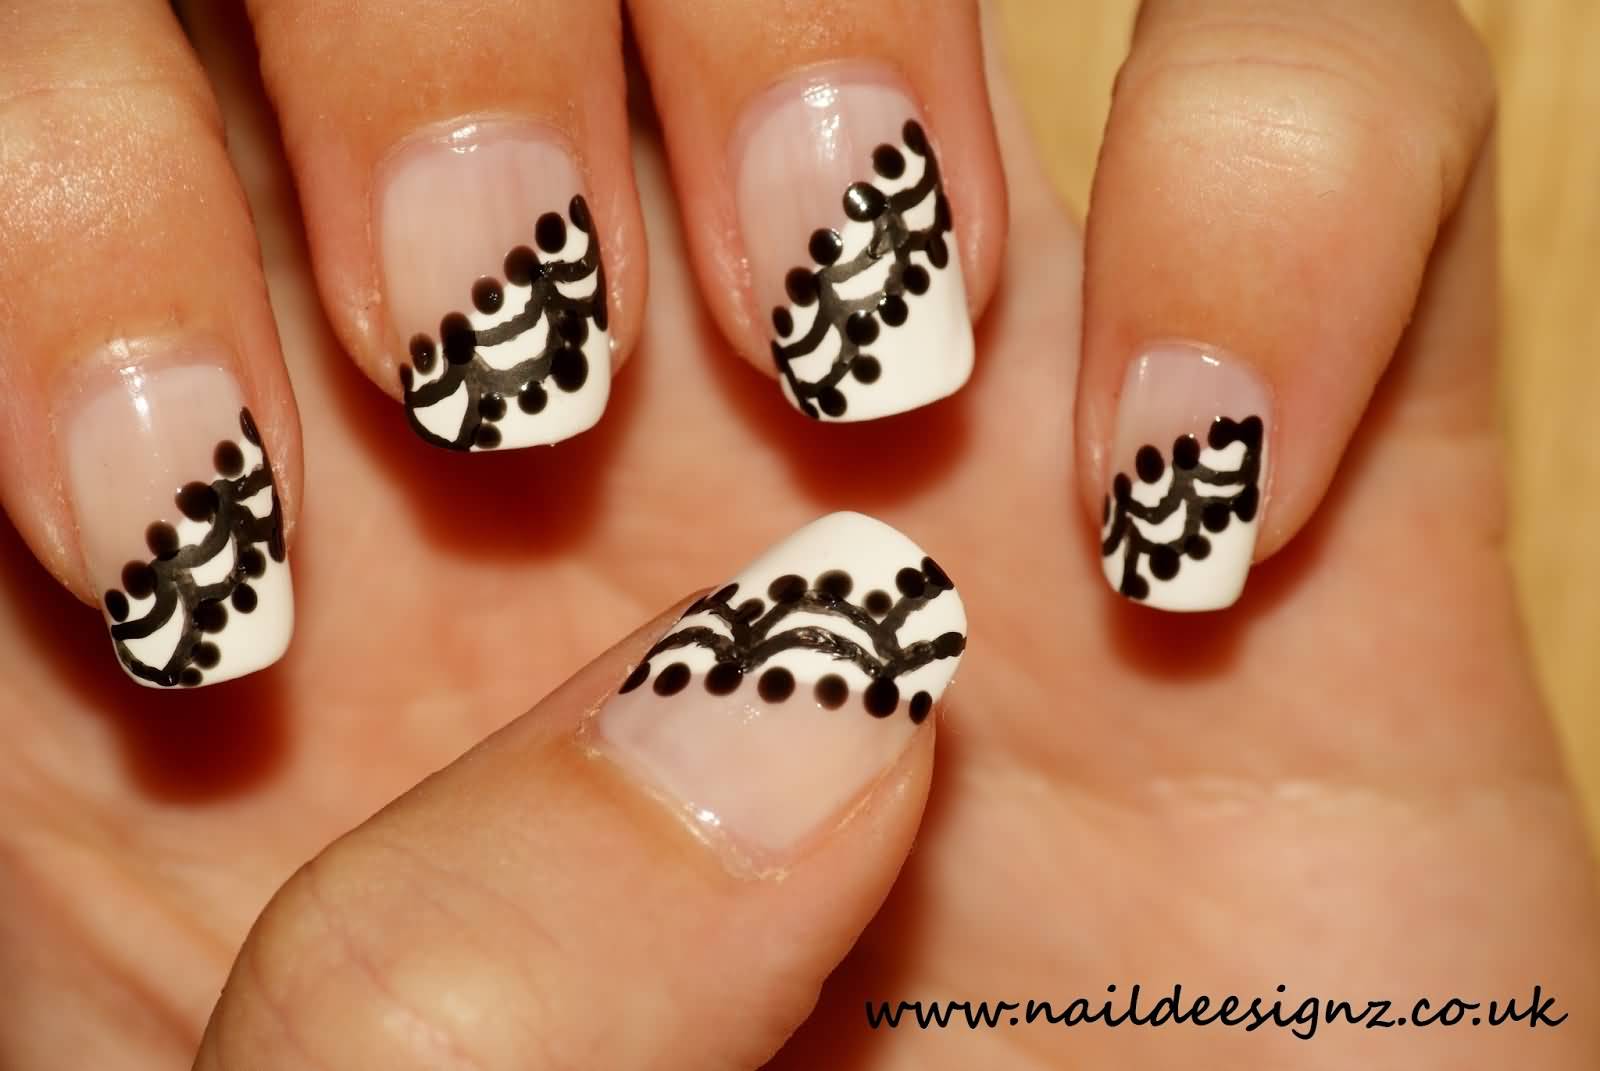 White Tip Nails With Black Lace Nail Design